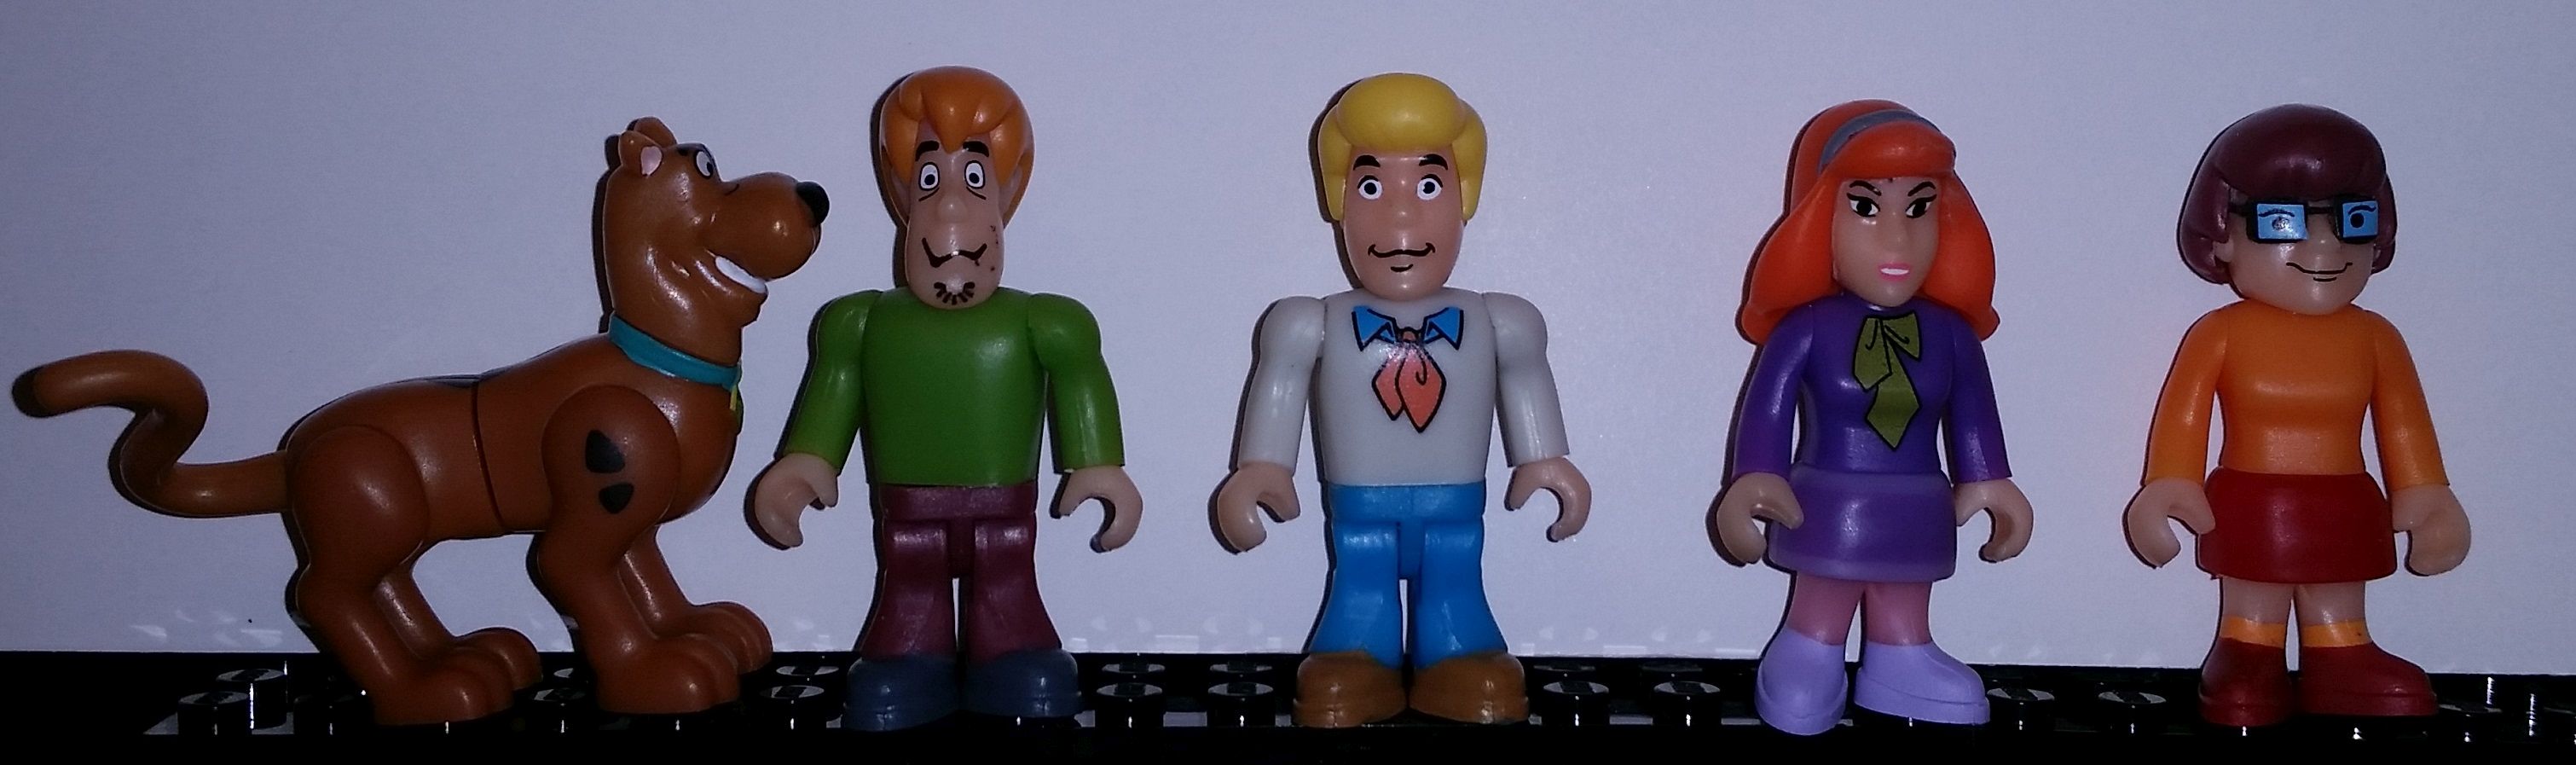 Official Lego Scooby Doo Minifigures Soon! Confirmed at London Toy Fair ...